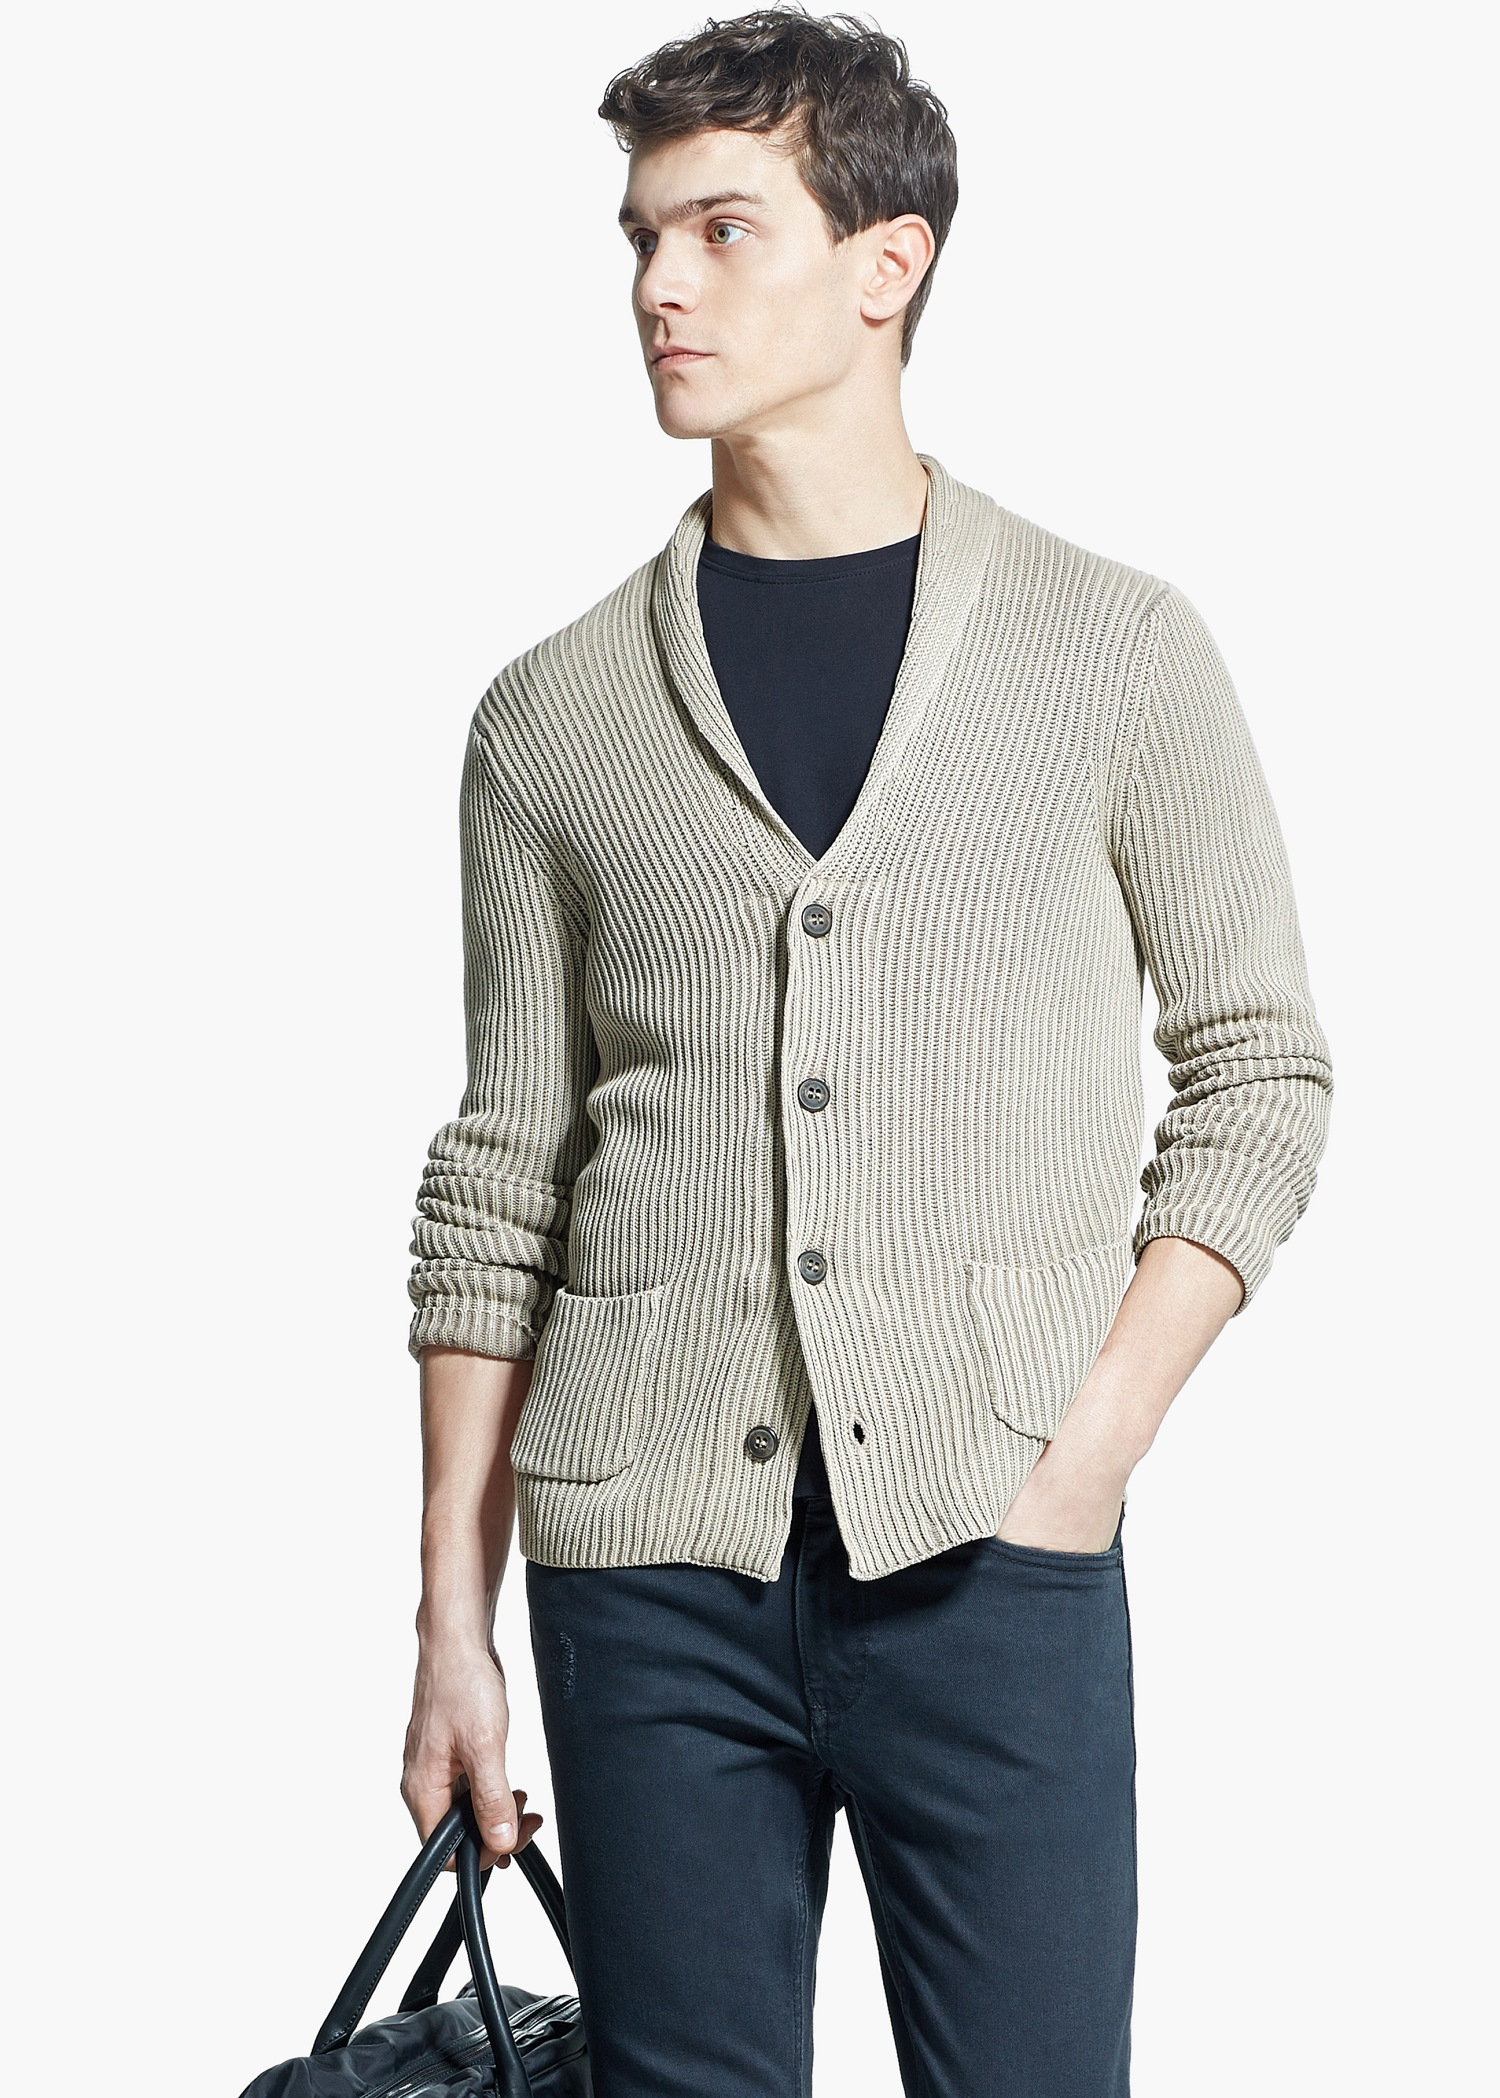 Lyst - Mango Textured Cotton Cardigan in Natural for Men